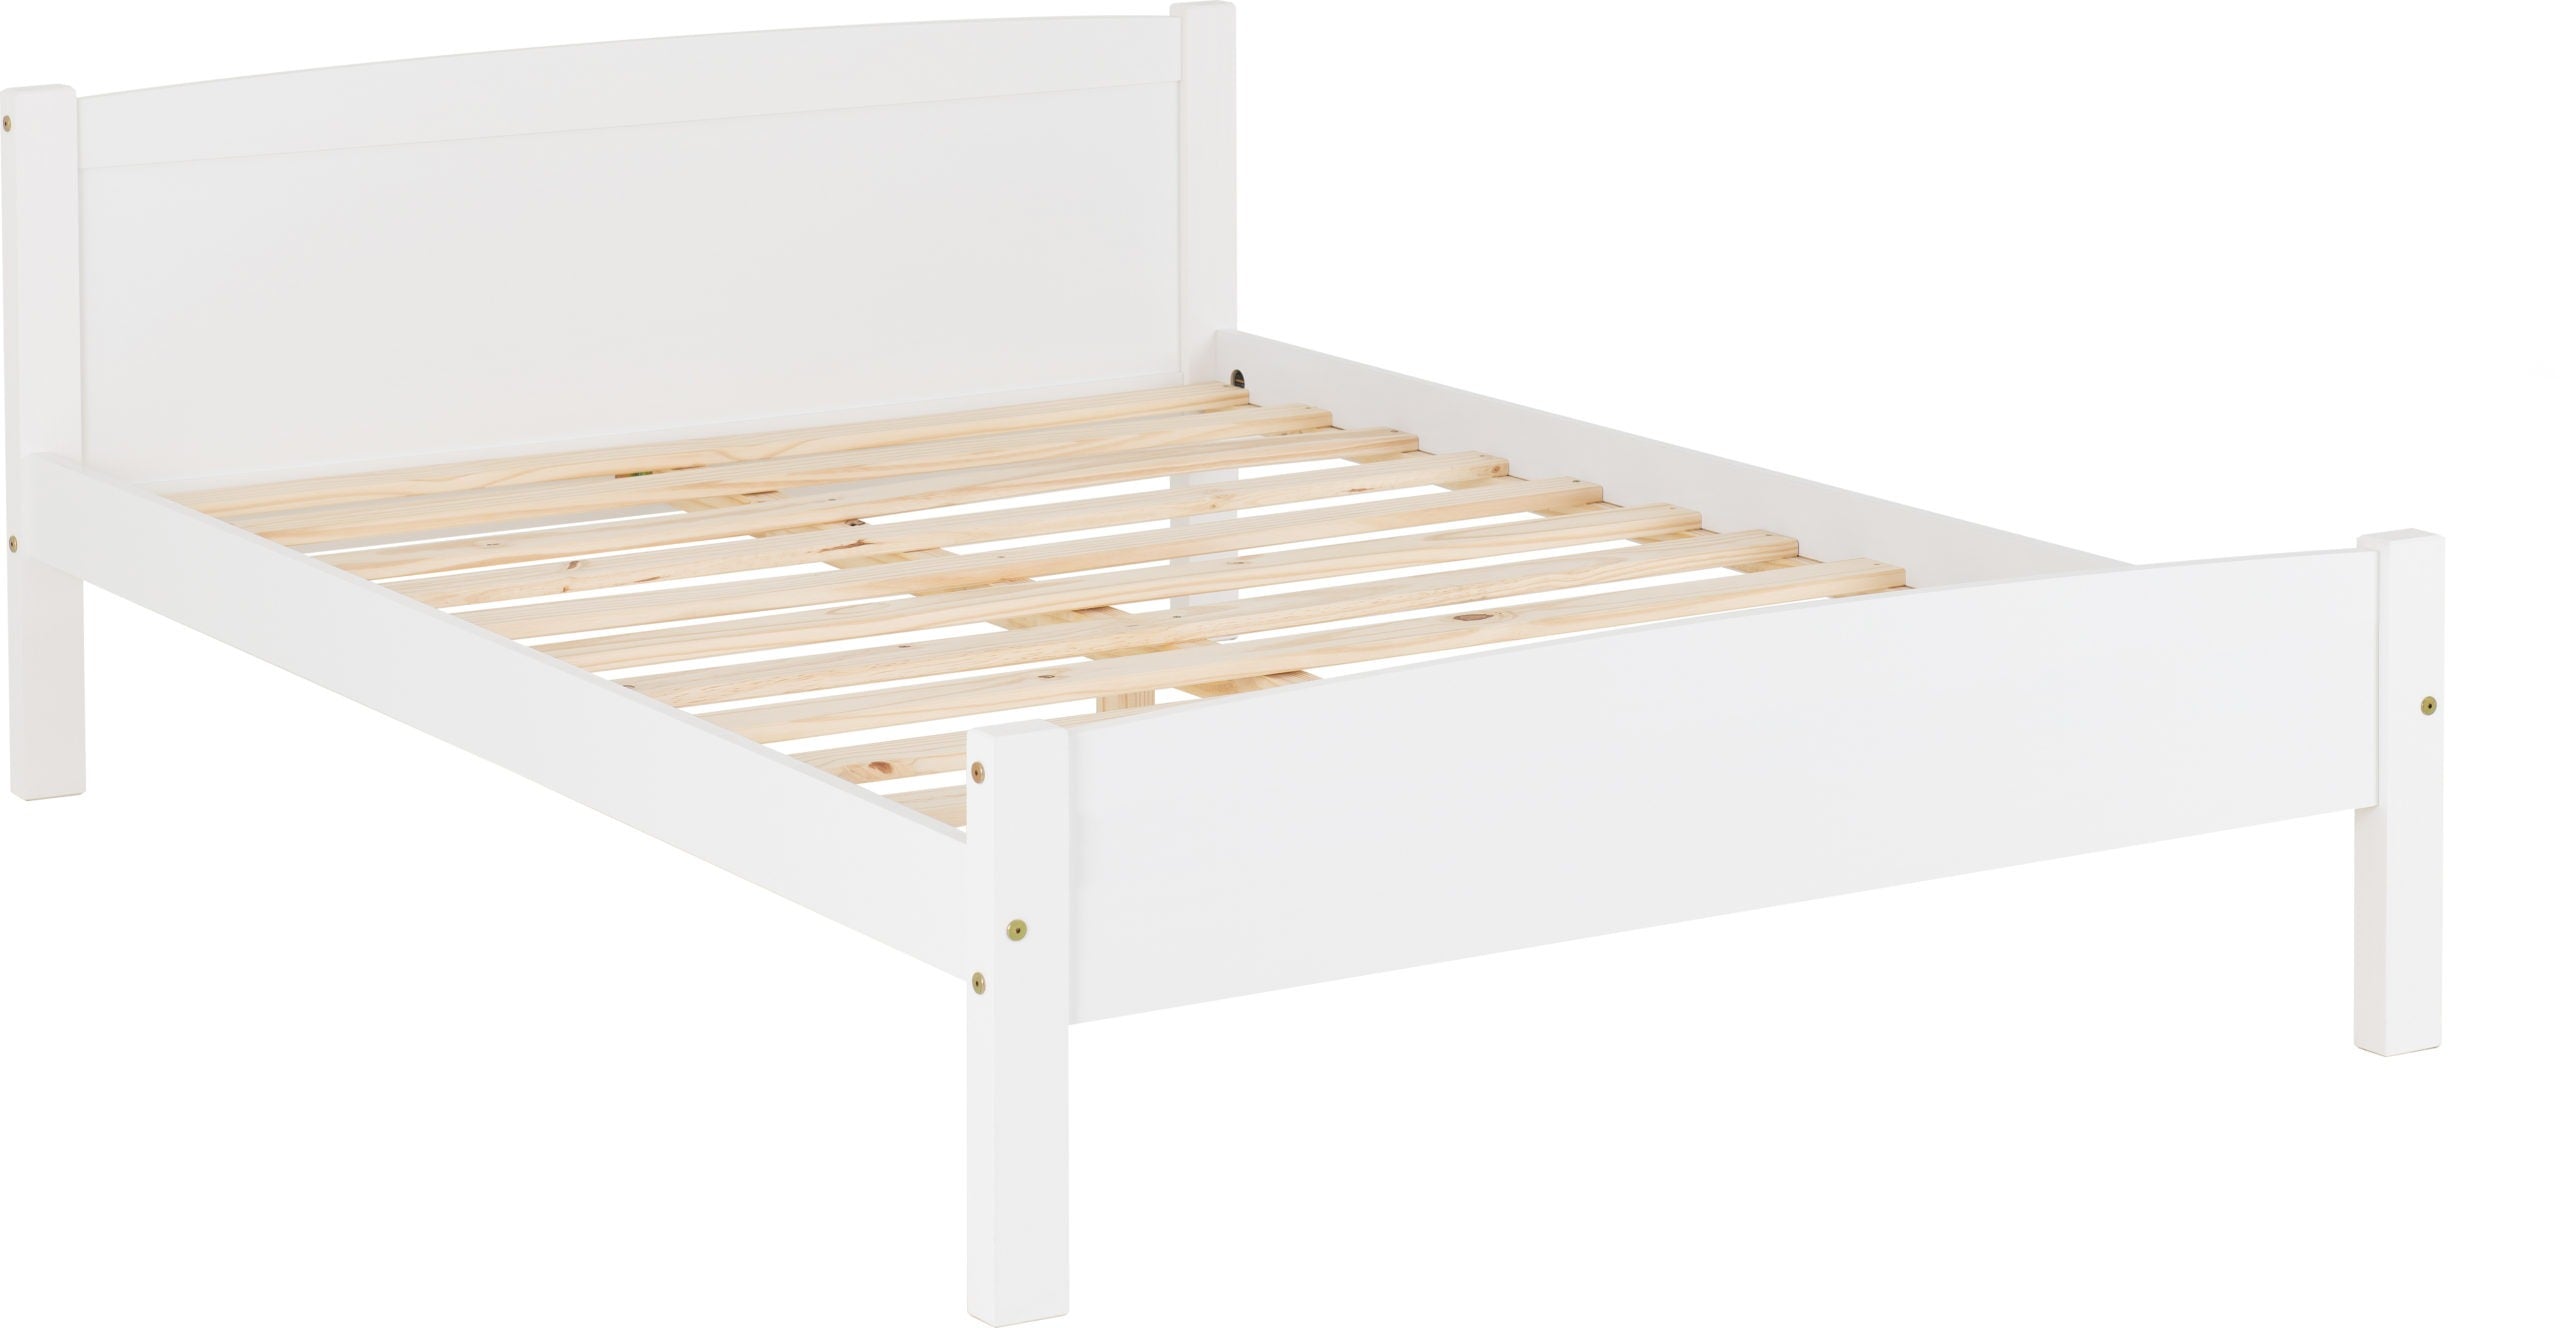 Amber 4'6" Bed